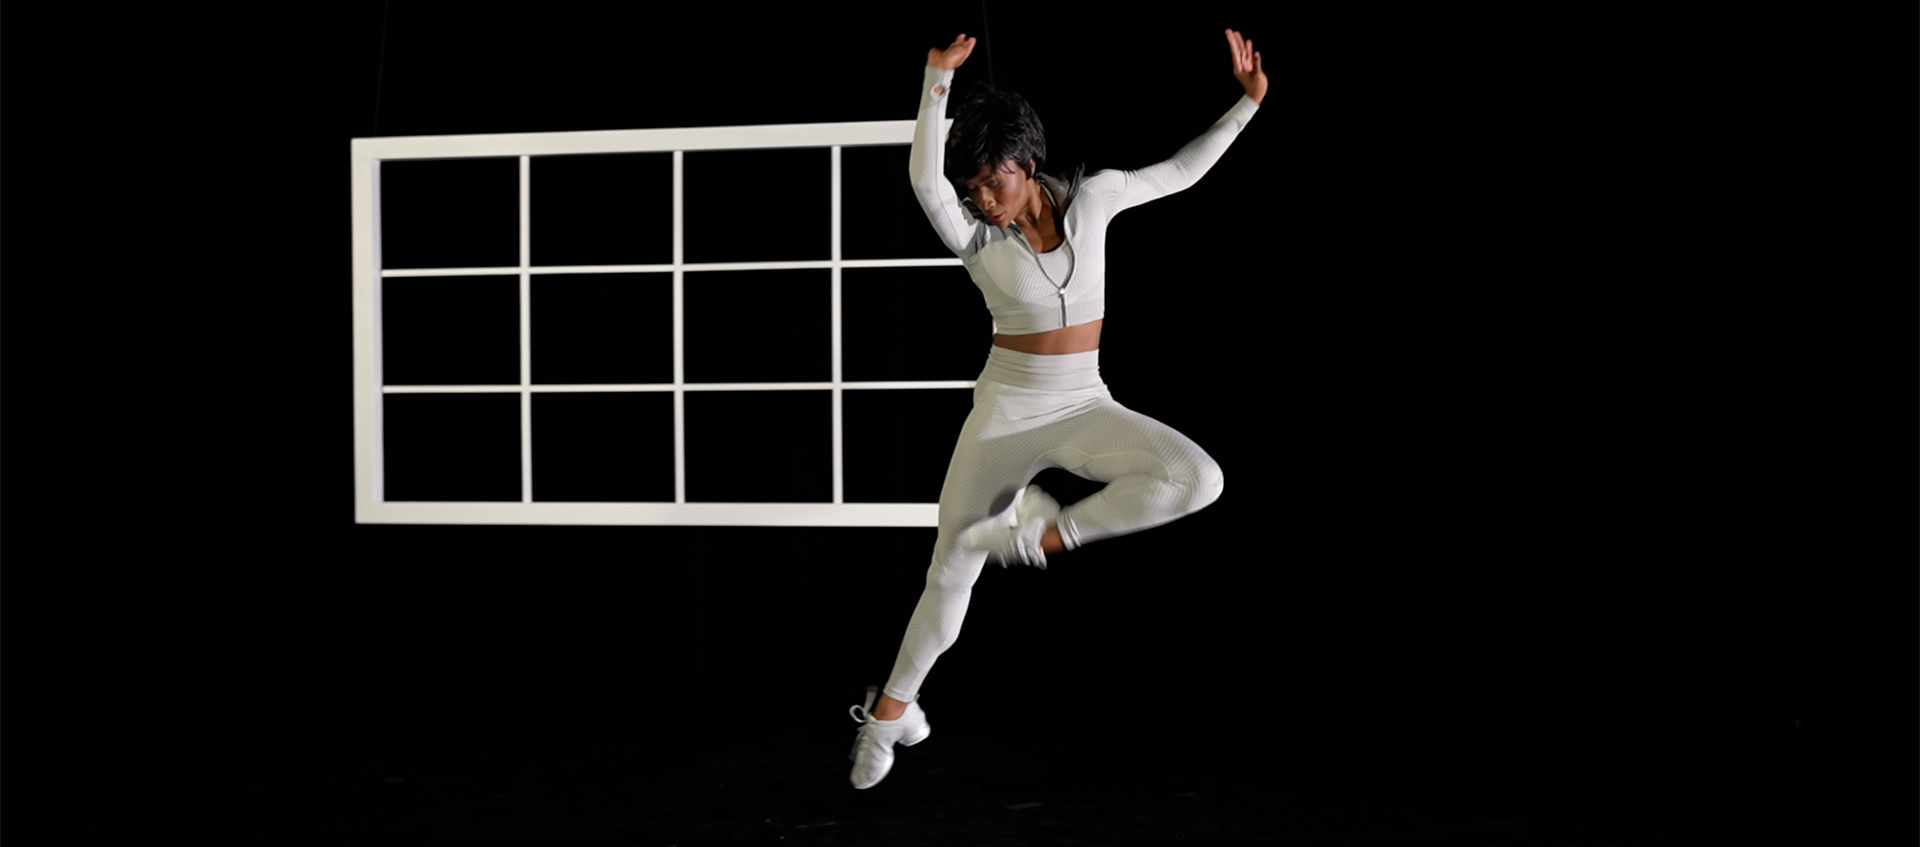 A woman jumping in the air on a black background with a white window behind her.